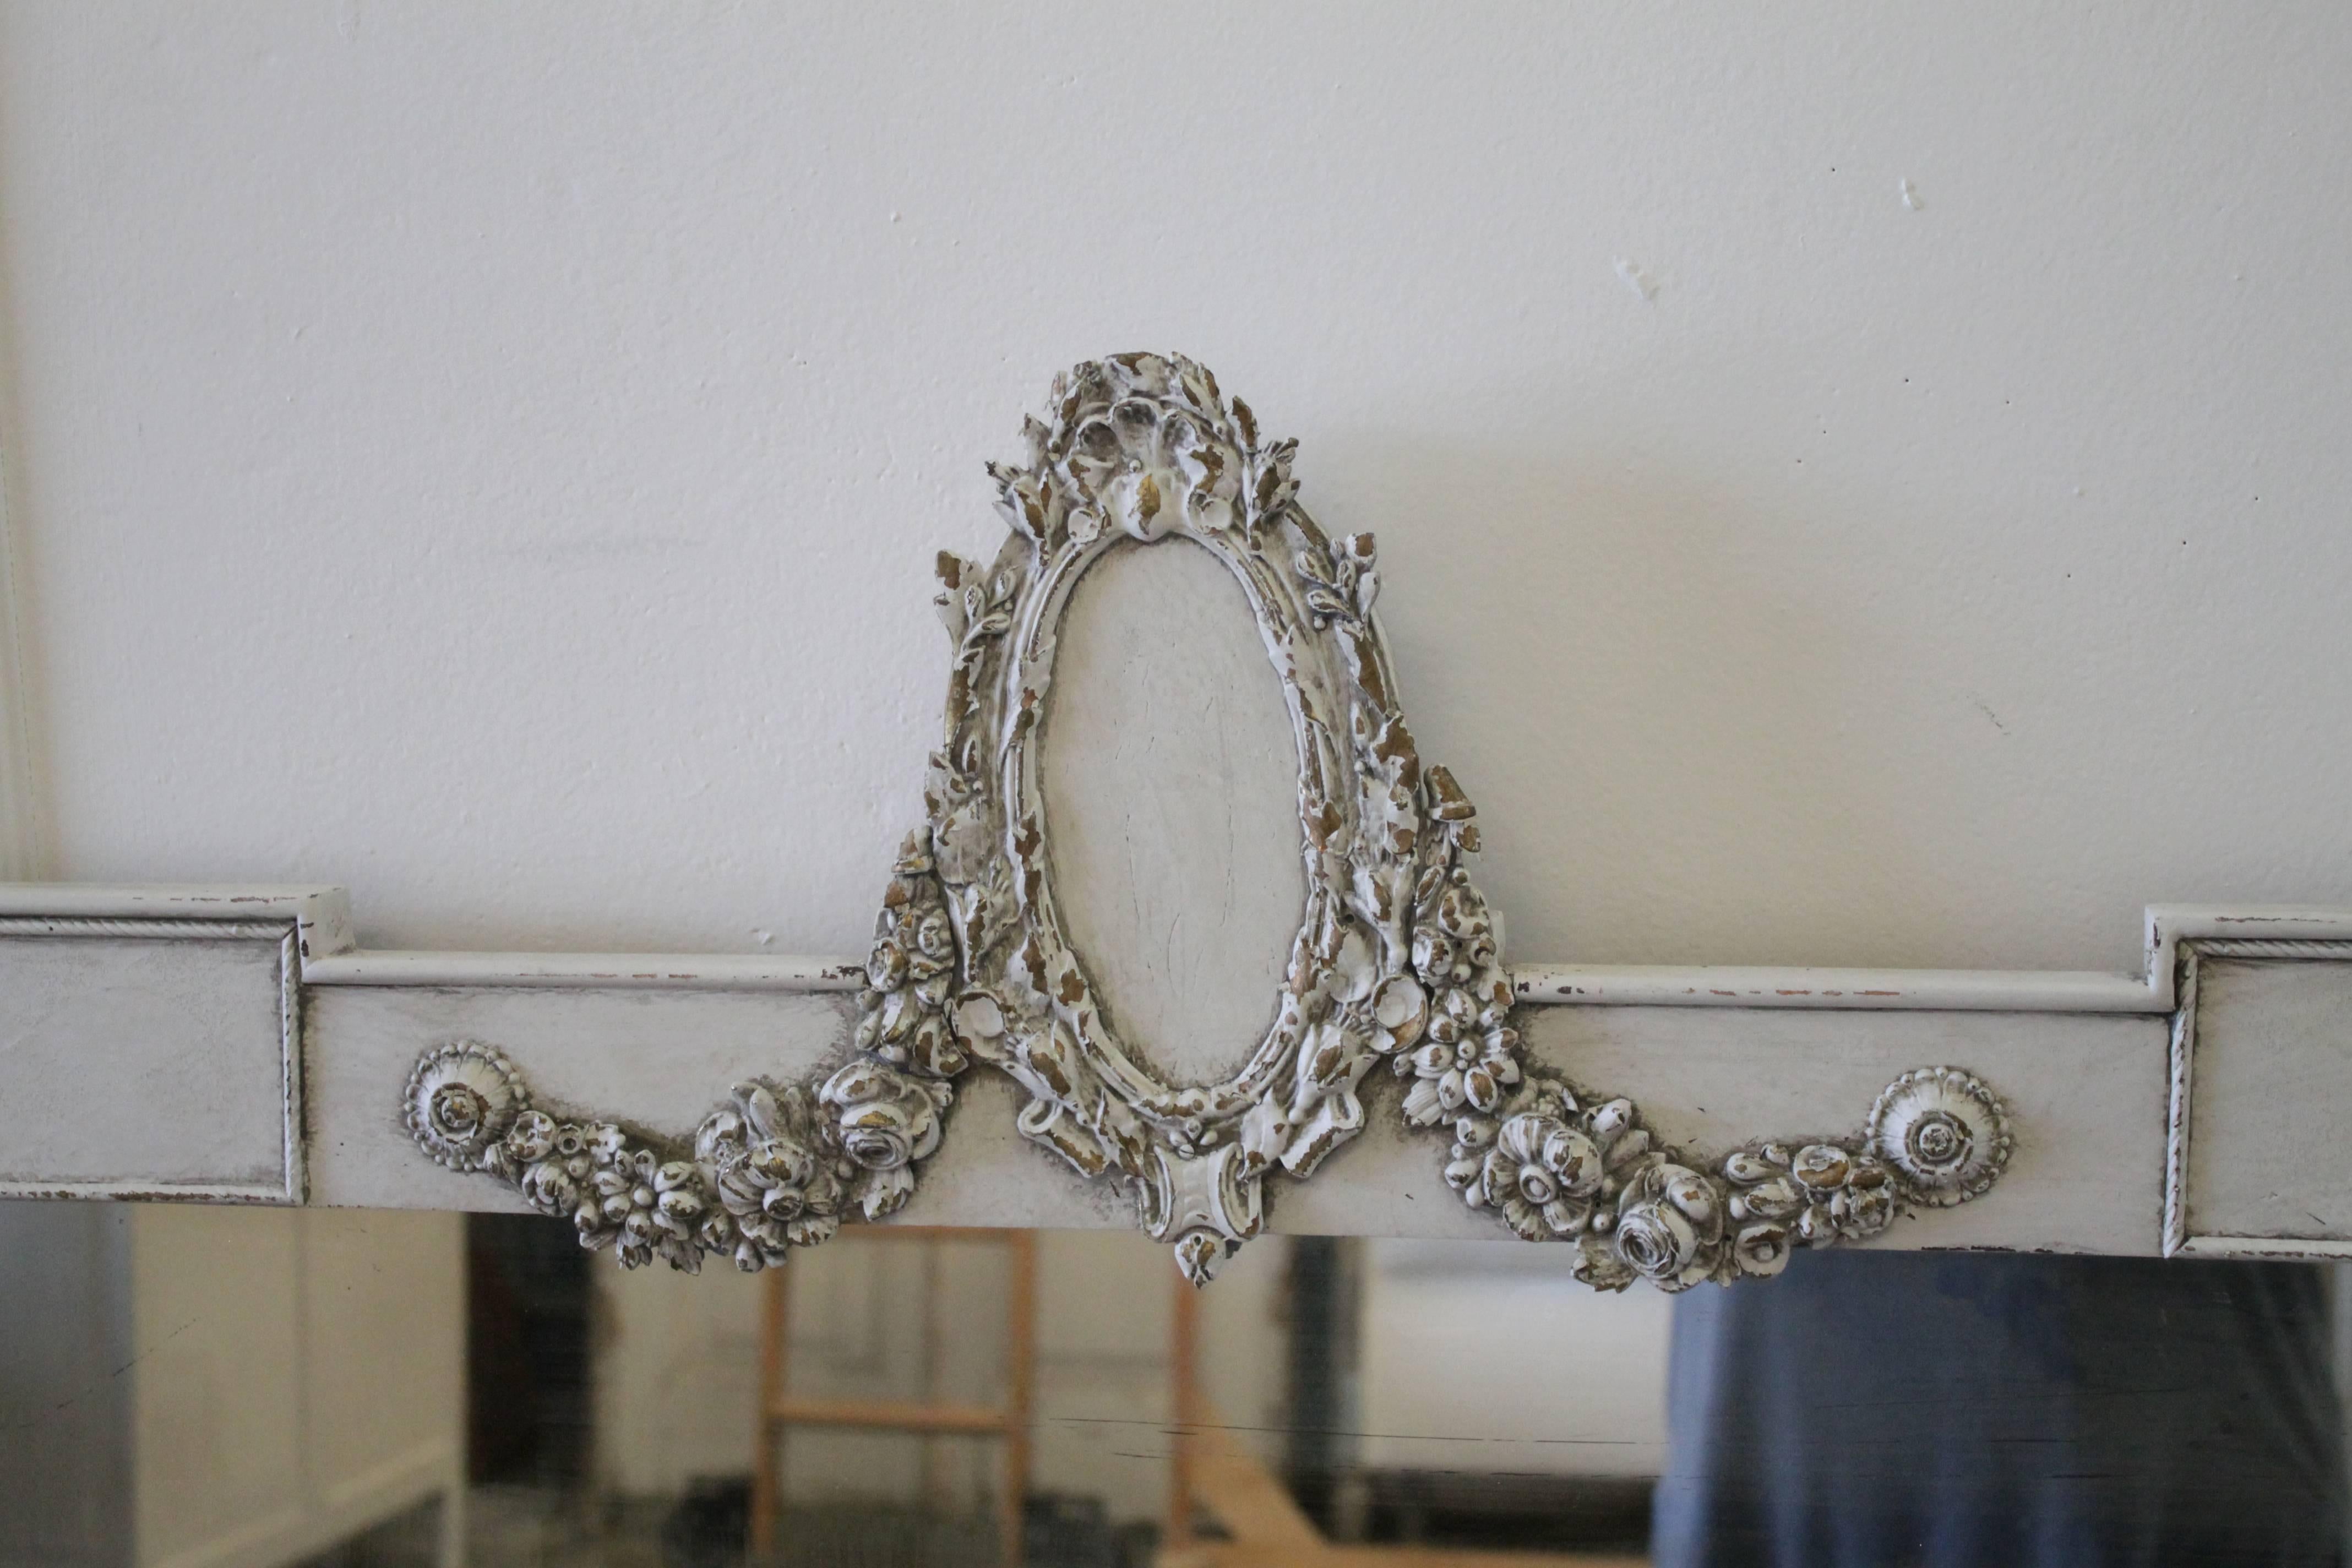 Vintage French mirror with bronze mounts painted in a light oyster grey color, subtle distressed edges, and antique patina. Mirror is solid wood, with wire ready to hang. Original mirror has slight areas of antique patina. We tried to show this in